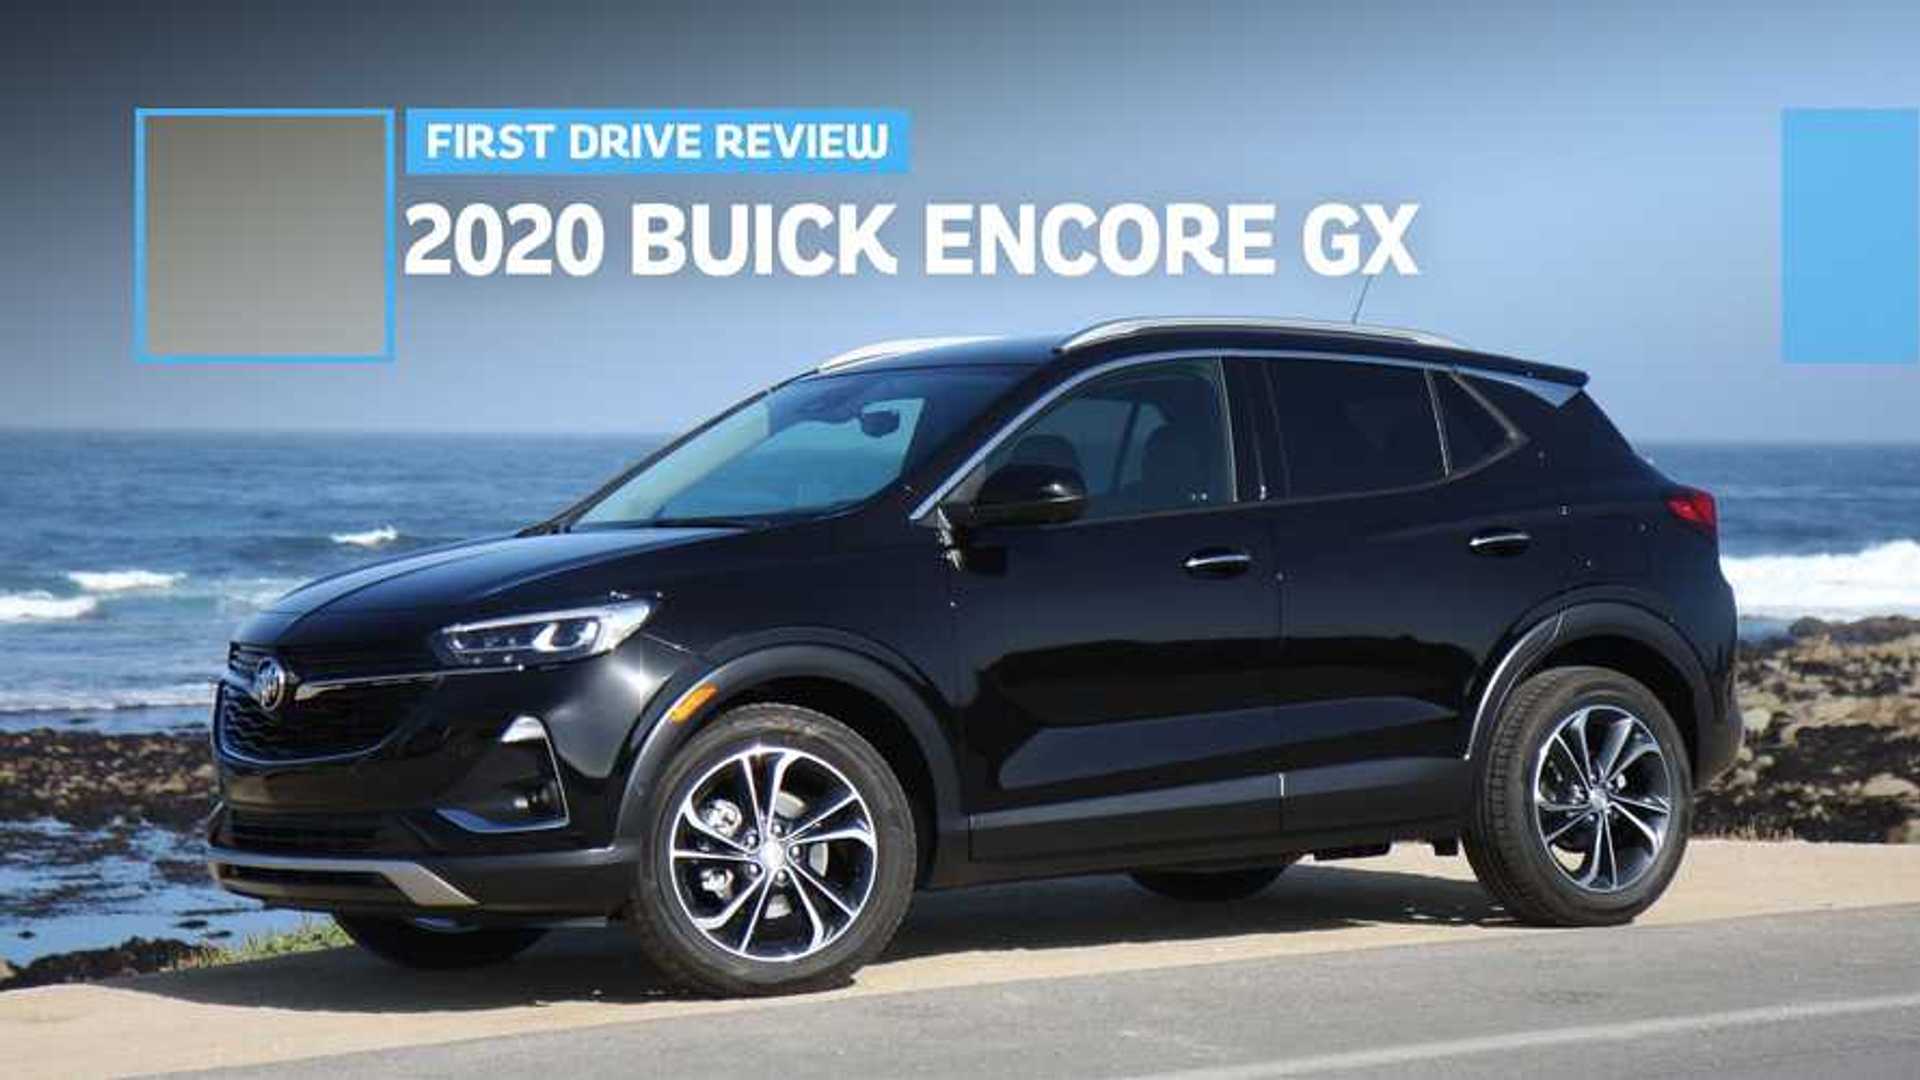 2020 Buick Encore GX First Drive Review: Pricey Luxury In Petite Form